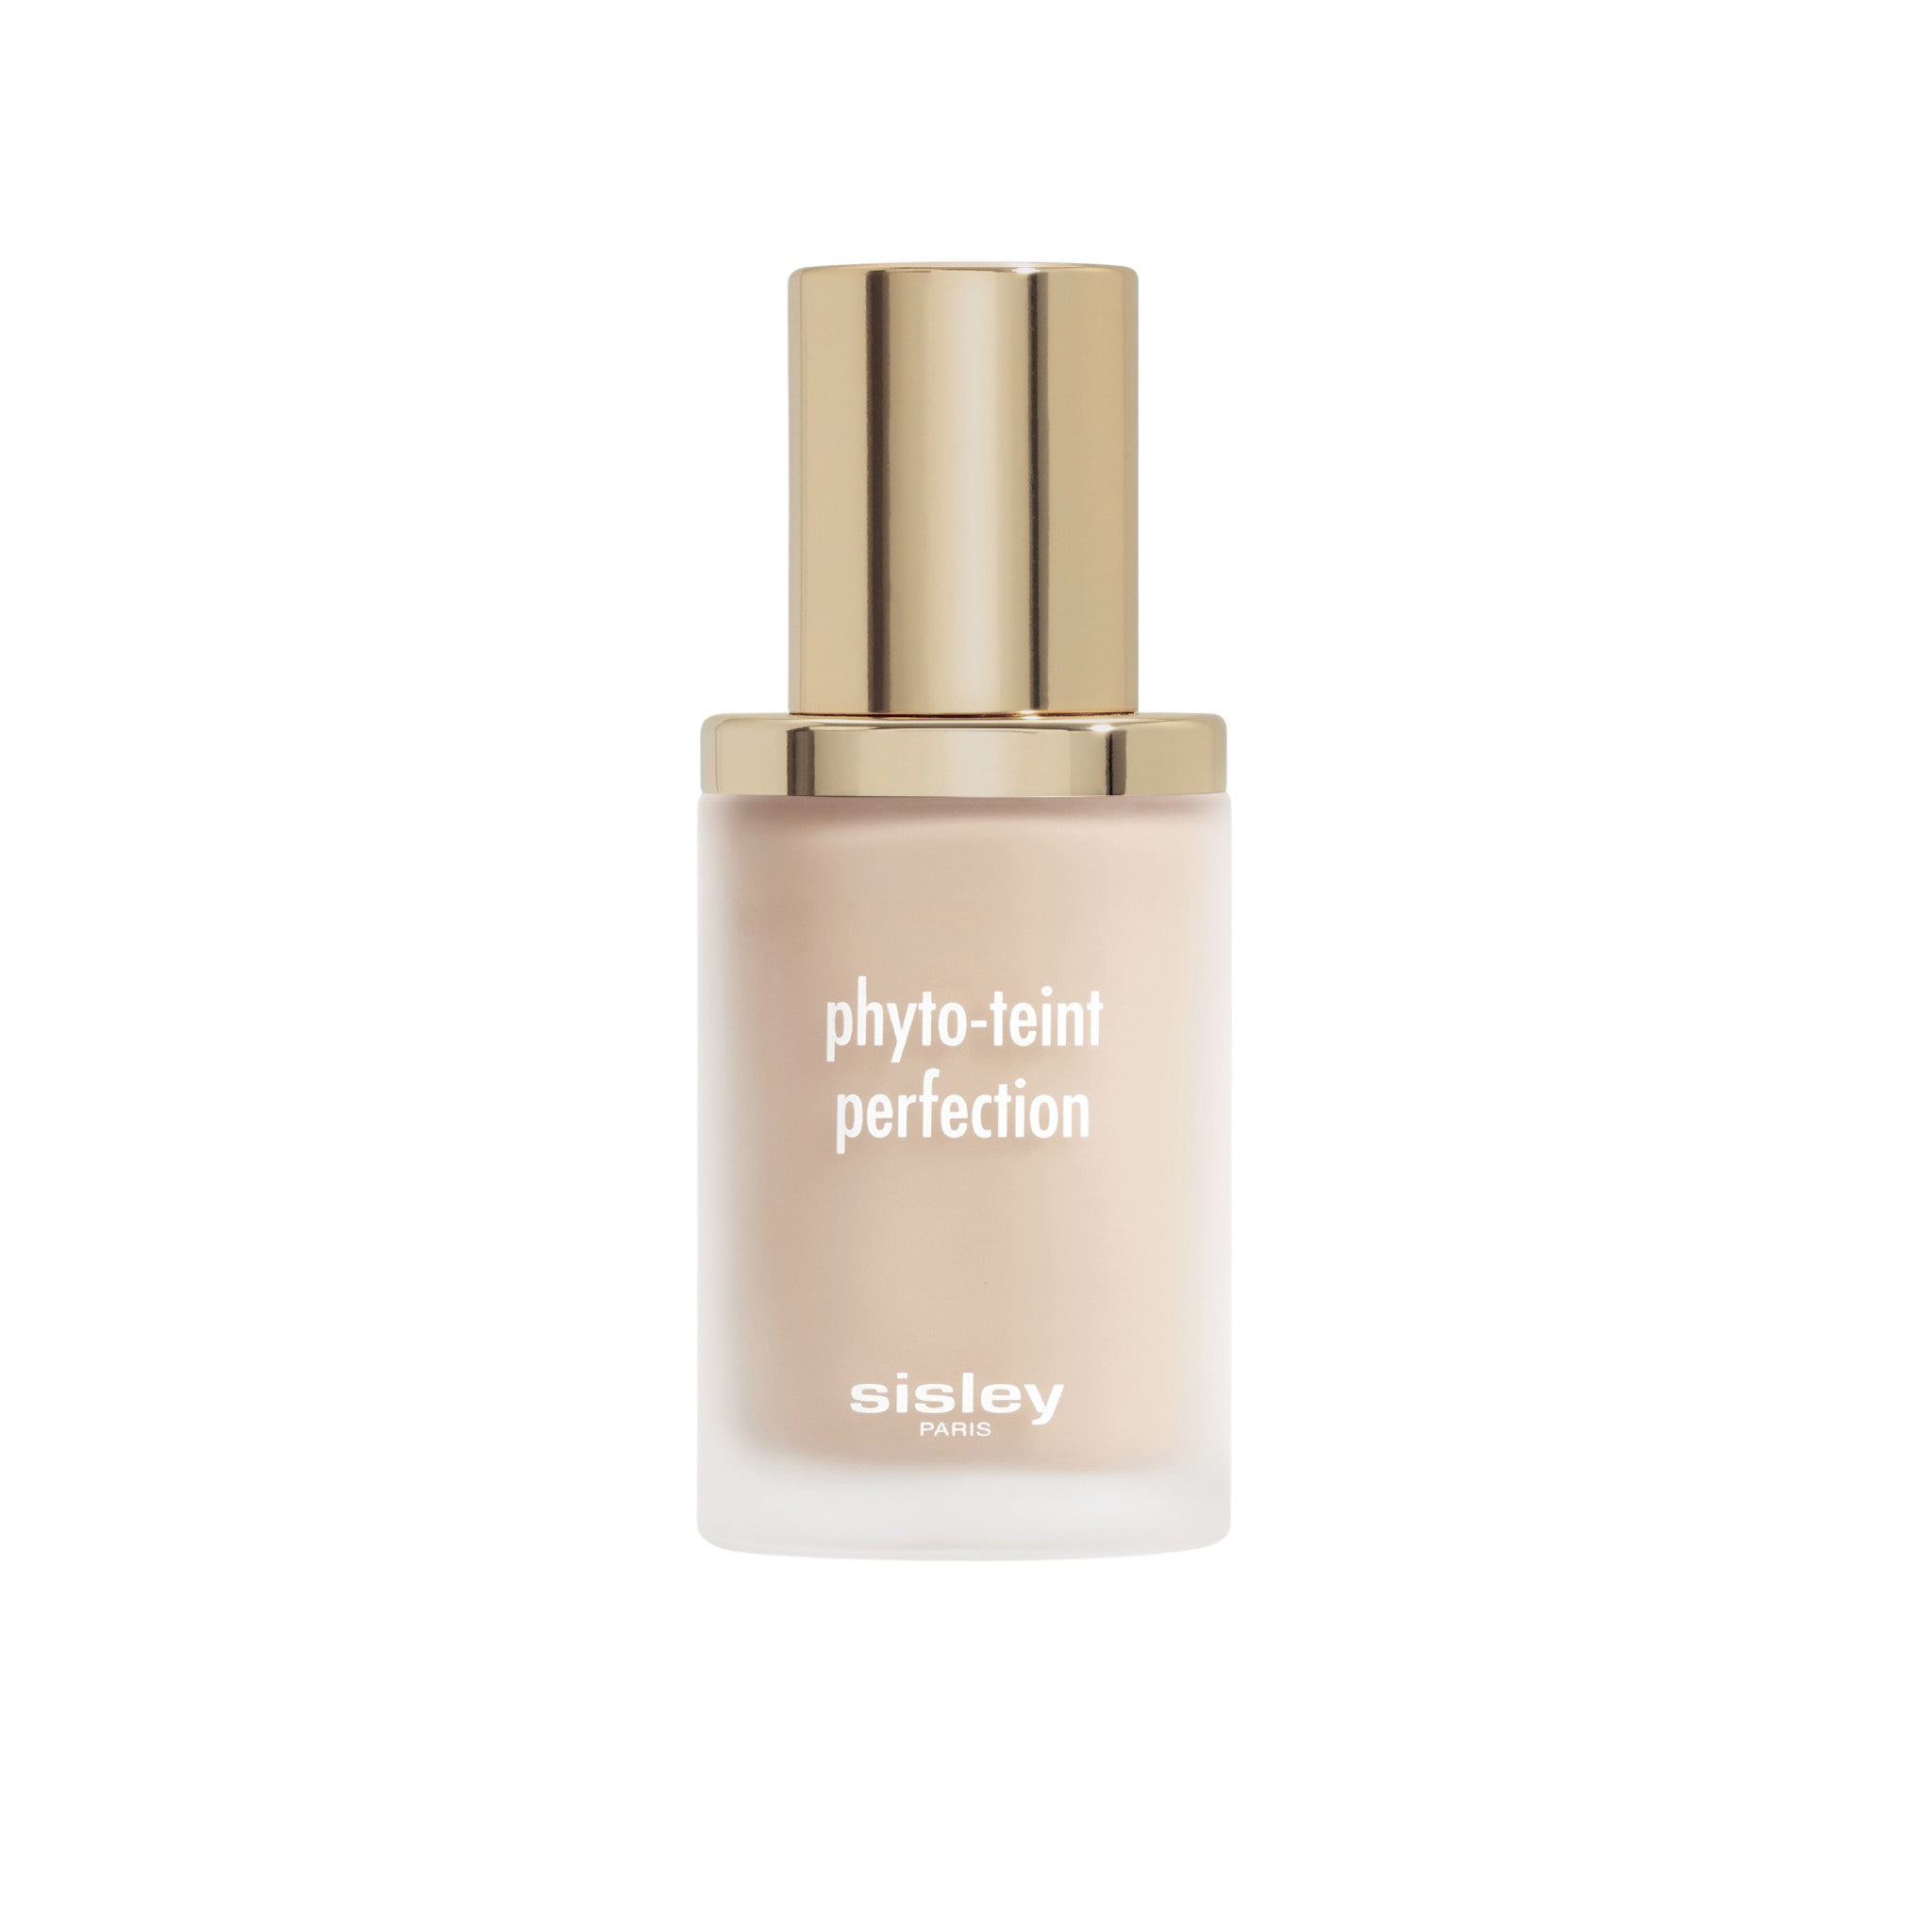 Sisley-Paris Phyto-Teint Perfection Color/Shade variant: 00C Swan main image. This product is for light cool complexions